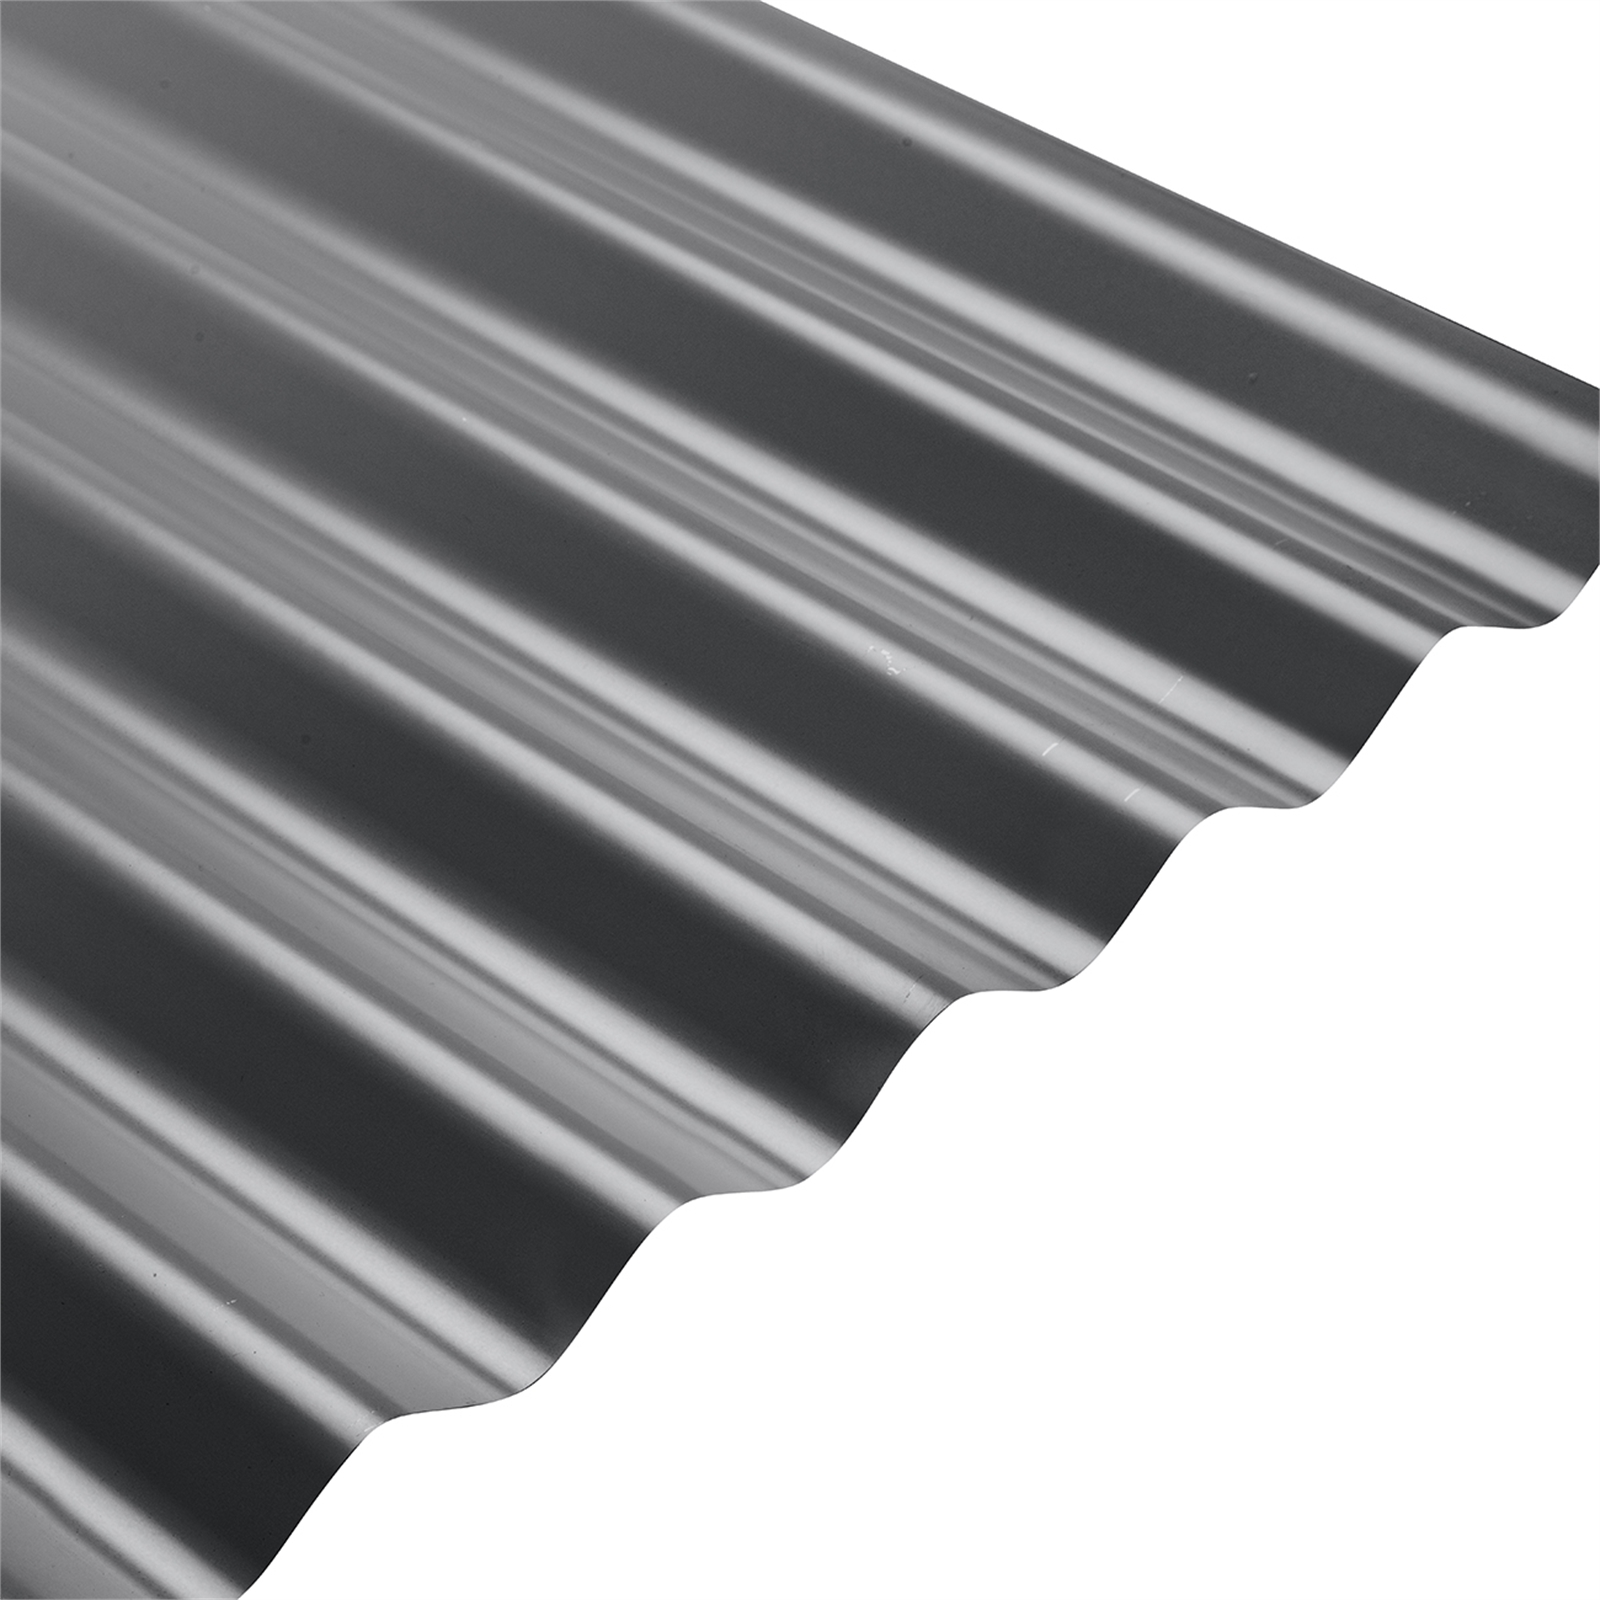 colorbond-steel-xrw-s-rib-corrugated-42-bmt-steel-roofing-monument